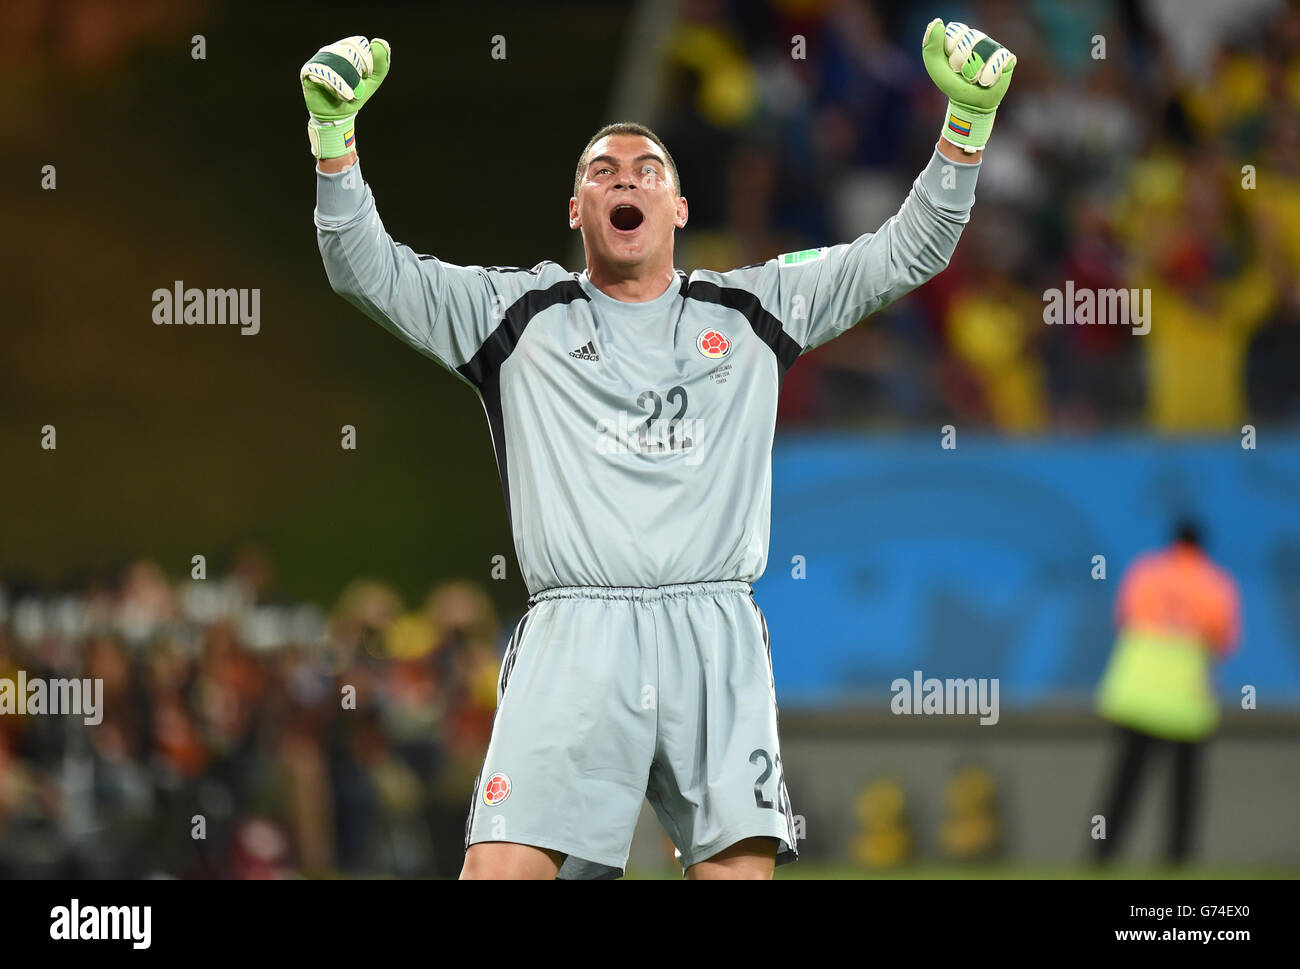 Soccer - FIFA World Cup 2014 - Group C - Japan v Colombia - Arena Pantanal. Colombia Goalkeeper Faryd Mondragon who is the oldest player to ever compete in a world cup final. Stock Photo